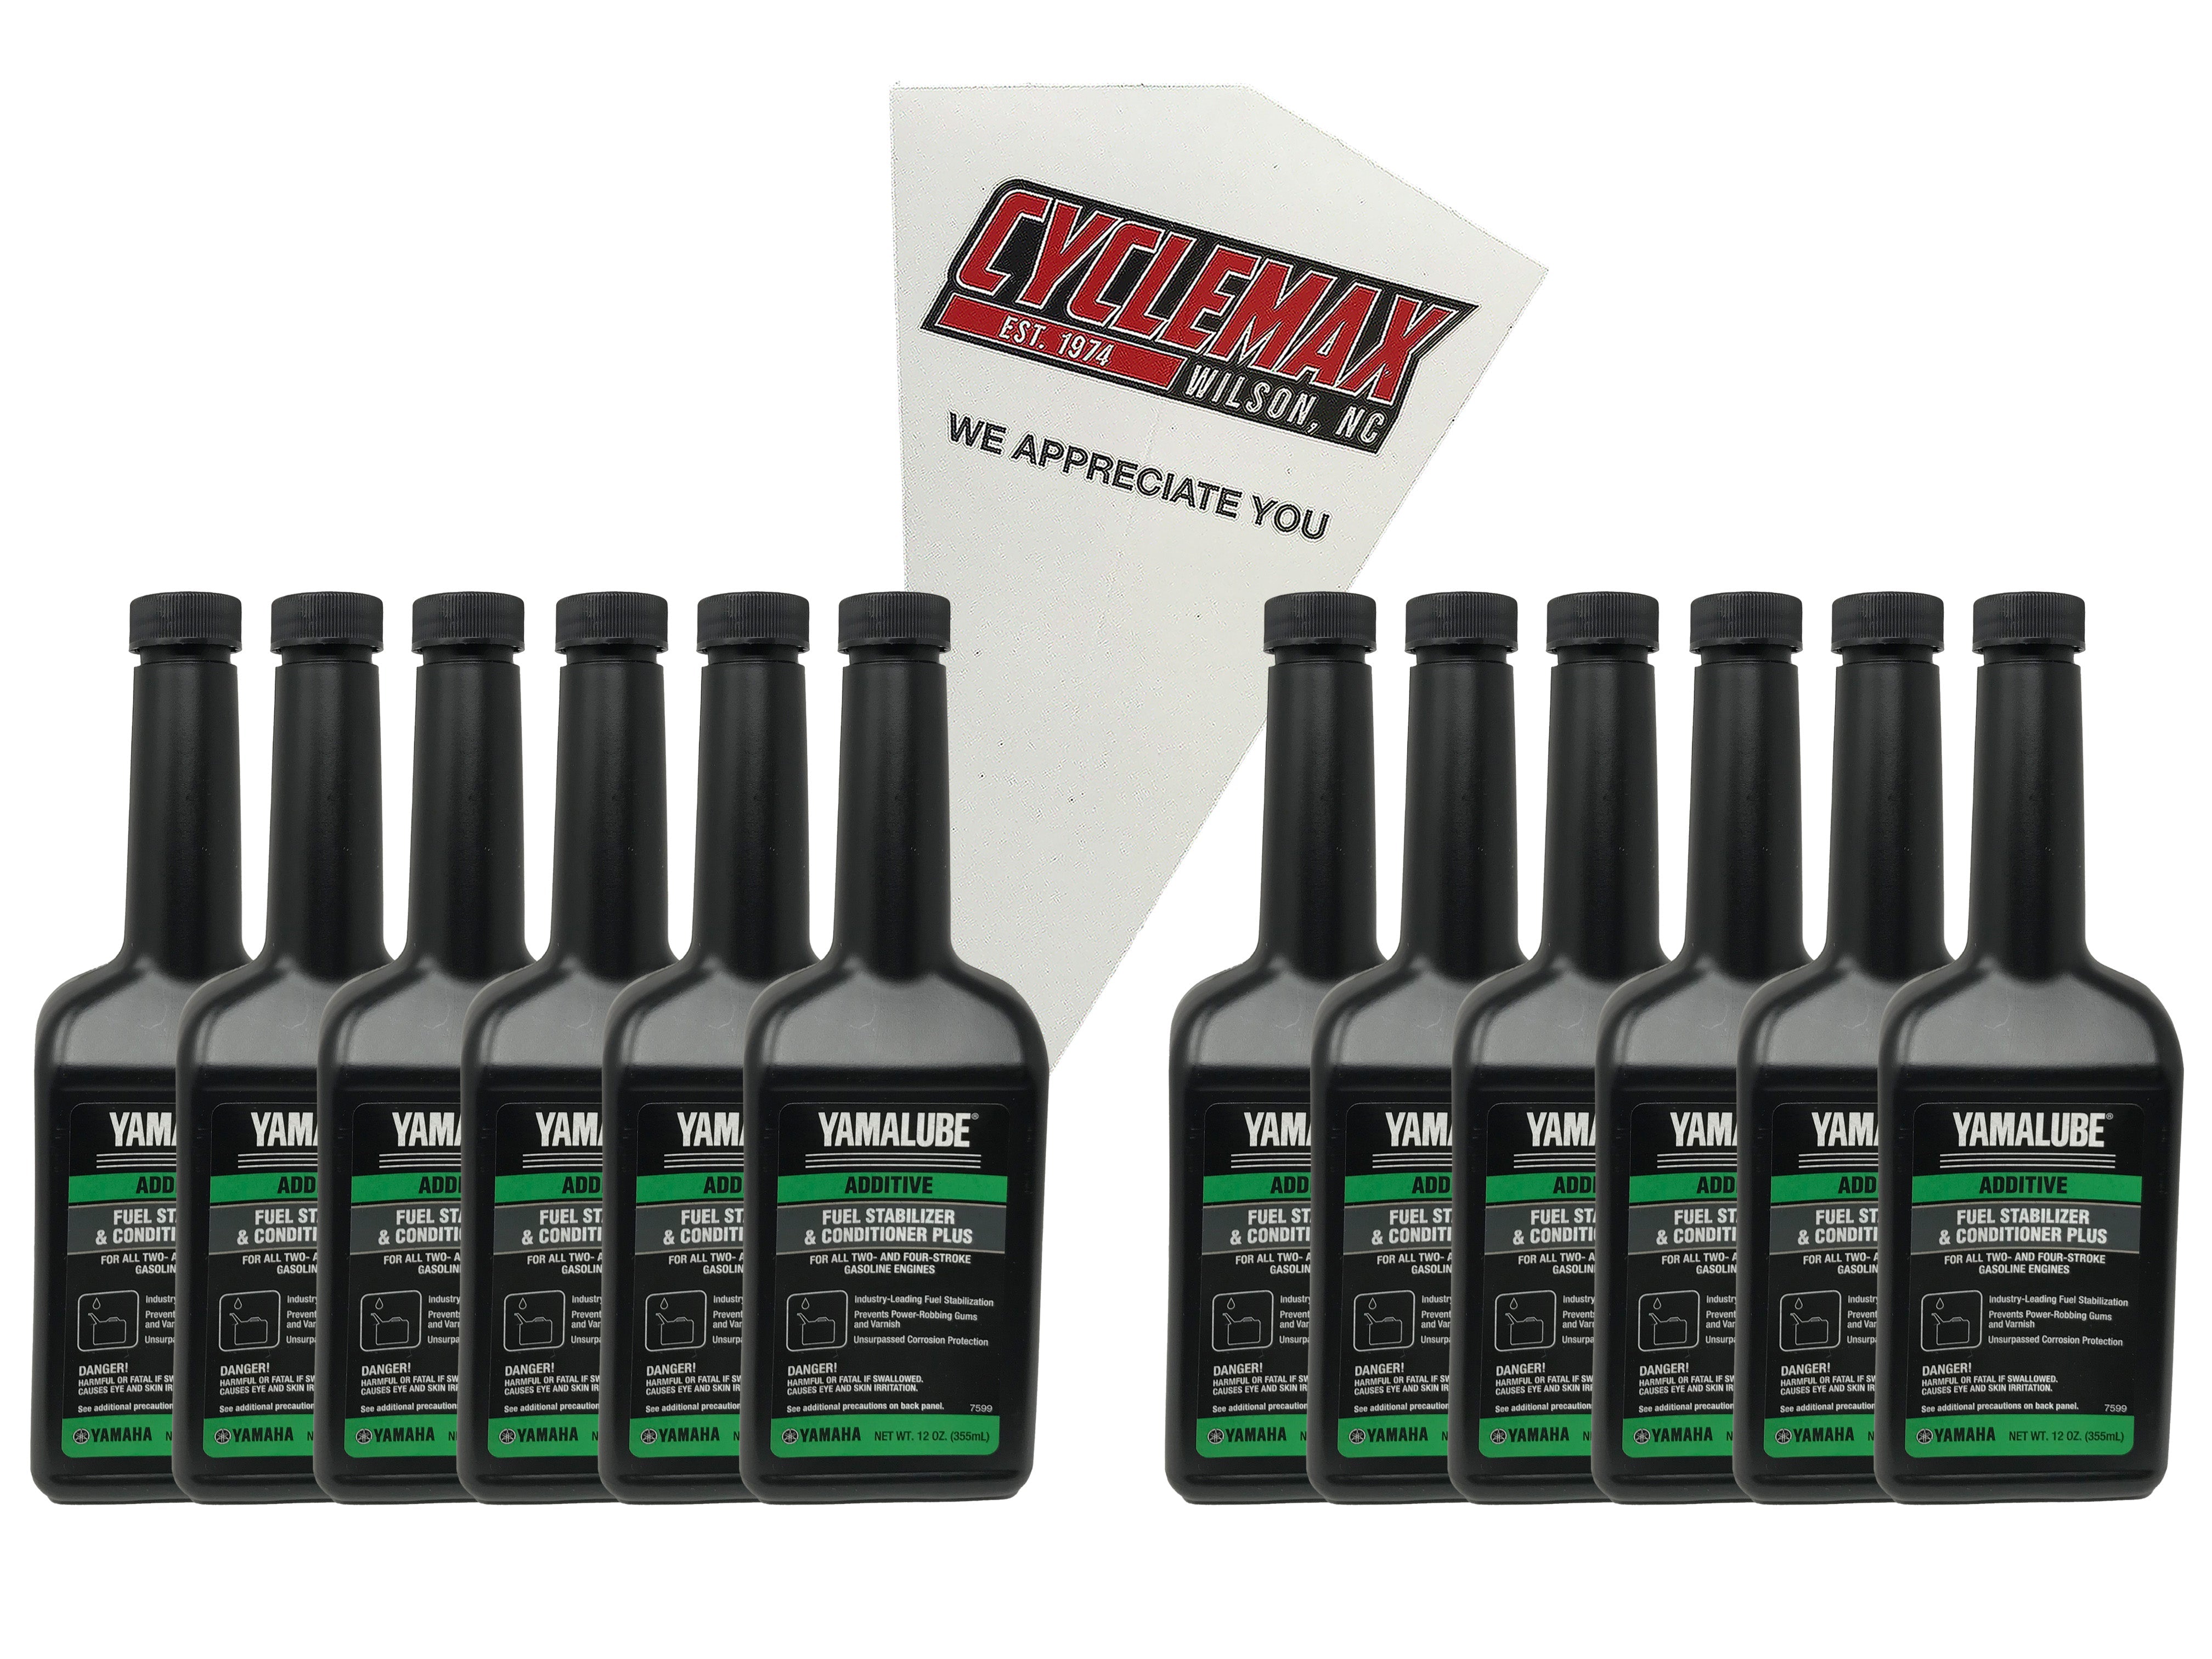 CYCLEMAX Twelve Pack for Yamaha Yamalube Fuel Stabilizer & Conditioner Plus ACC-FSTAB-PL-12 Contains Twelve 12oz Bottles and a Funnel